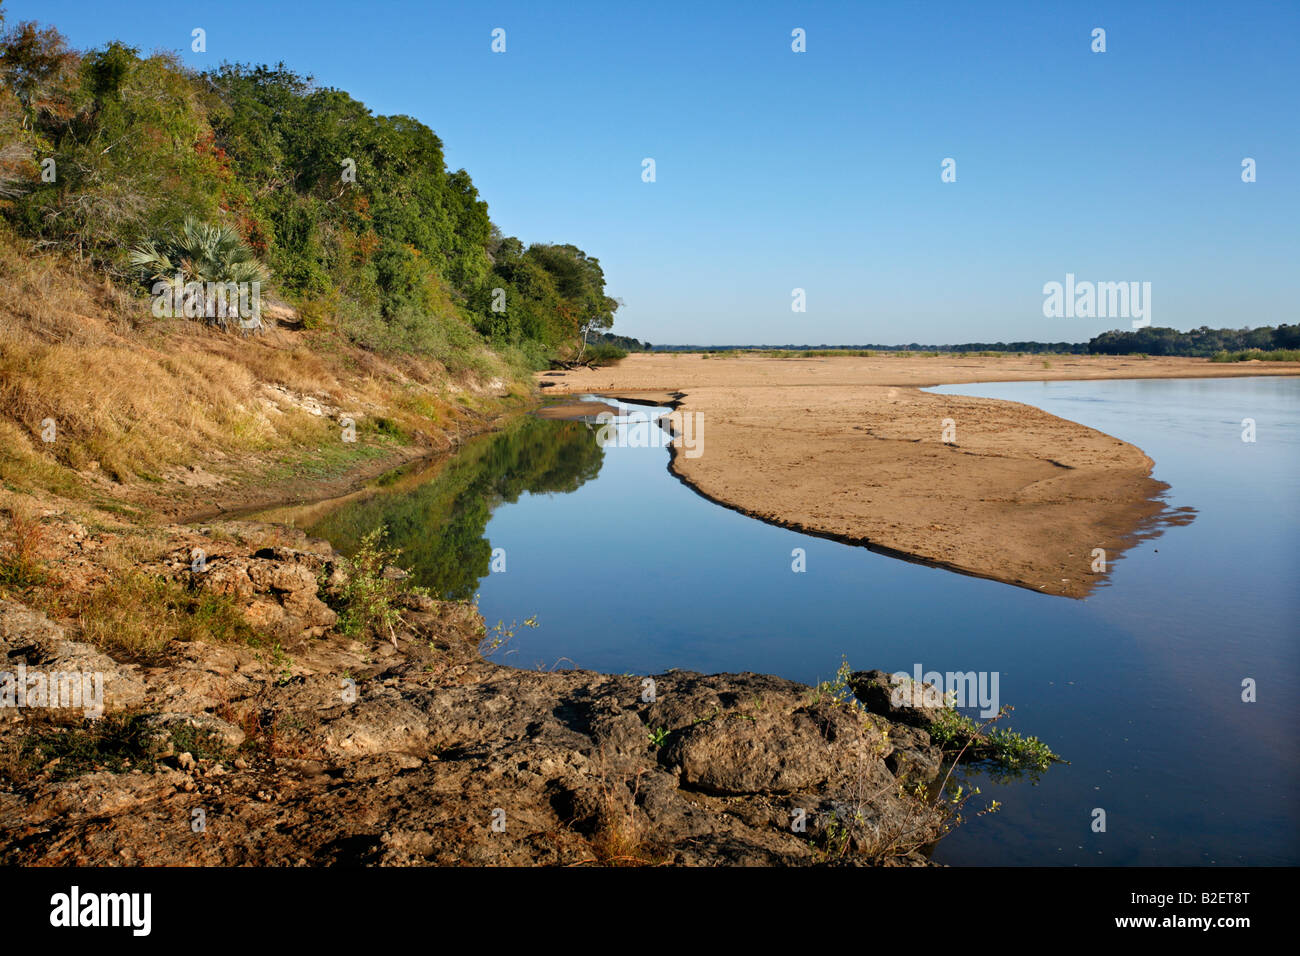 The Save River in central Mozambique Stock Photo